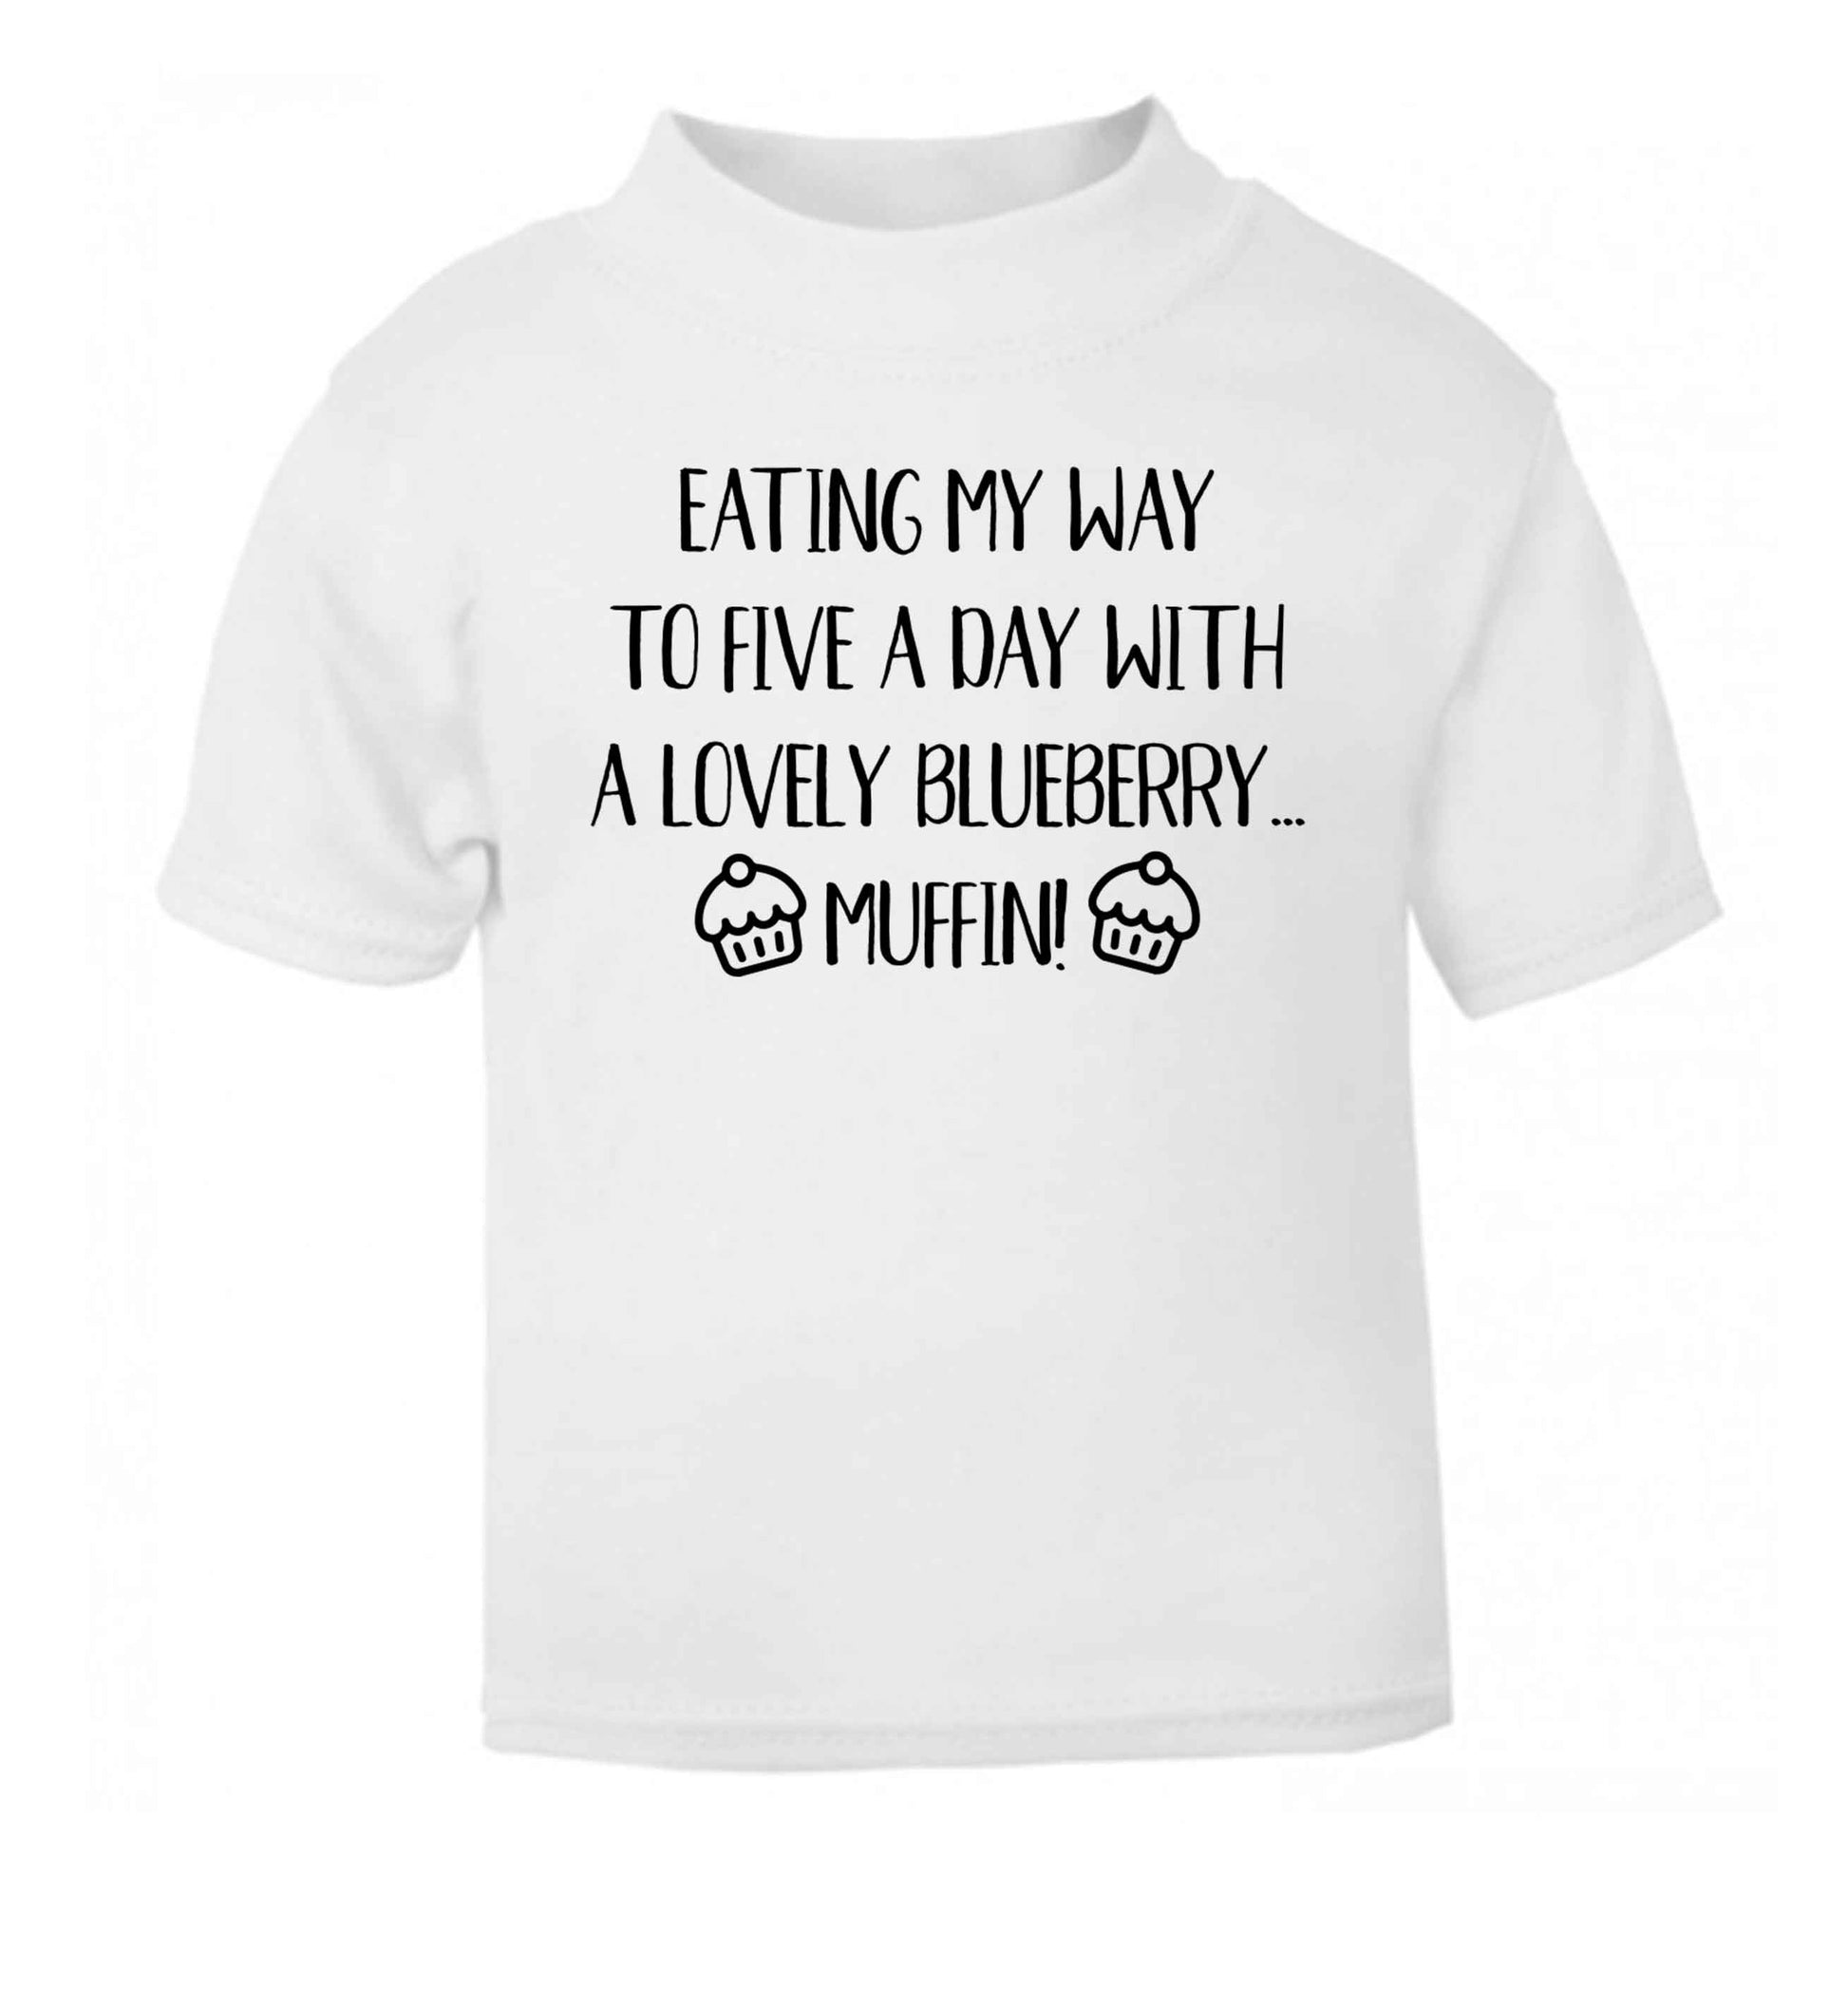 Eating my way to five a day with a lovely blueberry muffin white Baby Toddler Tshirt 2 Years